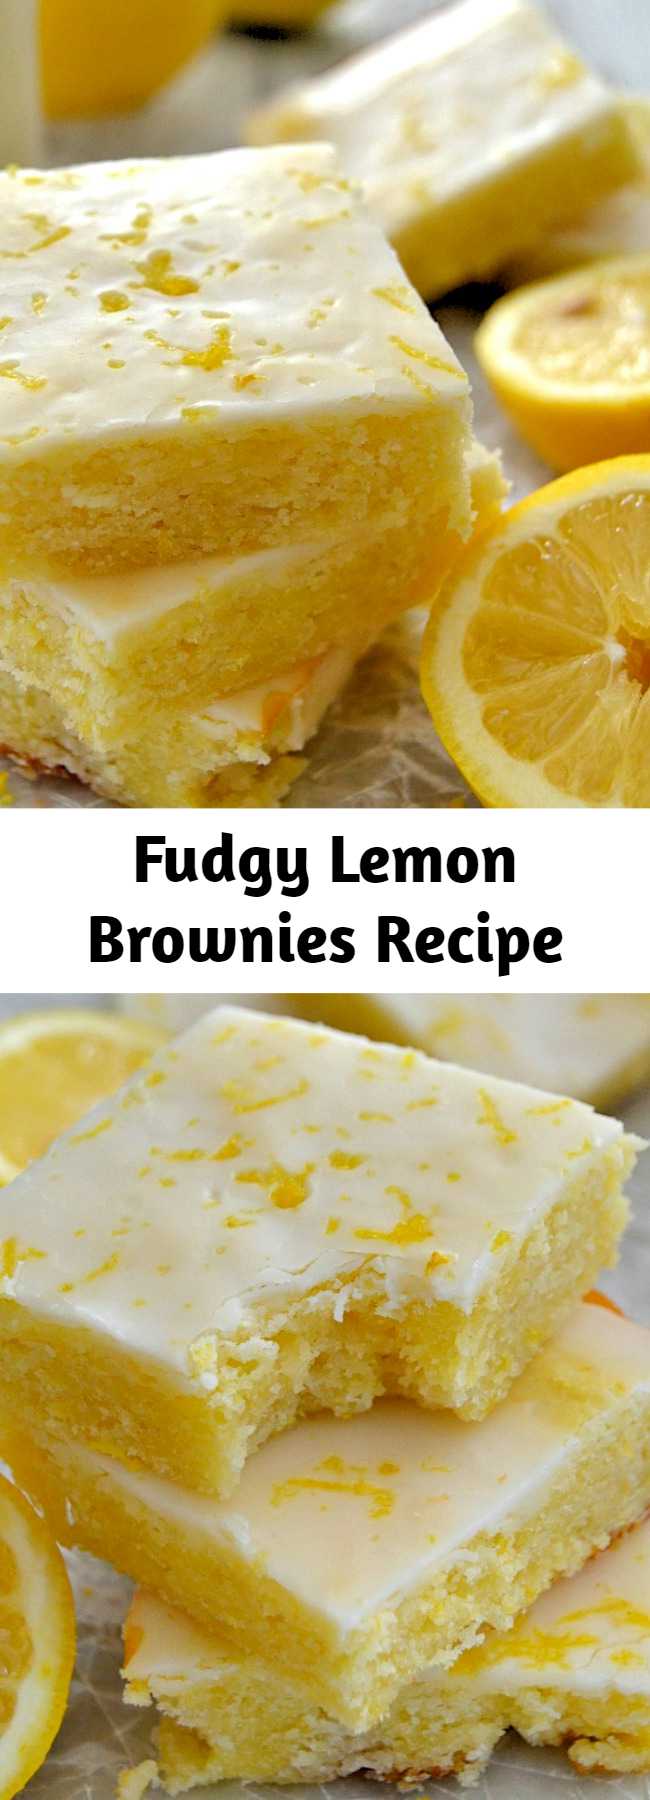 These Glazed Fudgy Lemon Brownies are incredible! Soft, chewy, moist, fudgy and packed with fresh lemon flavor!